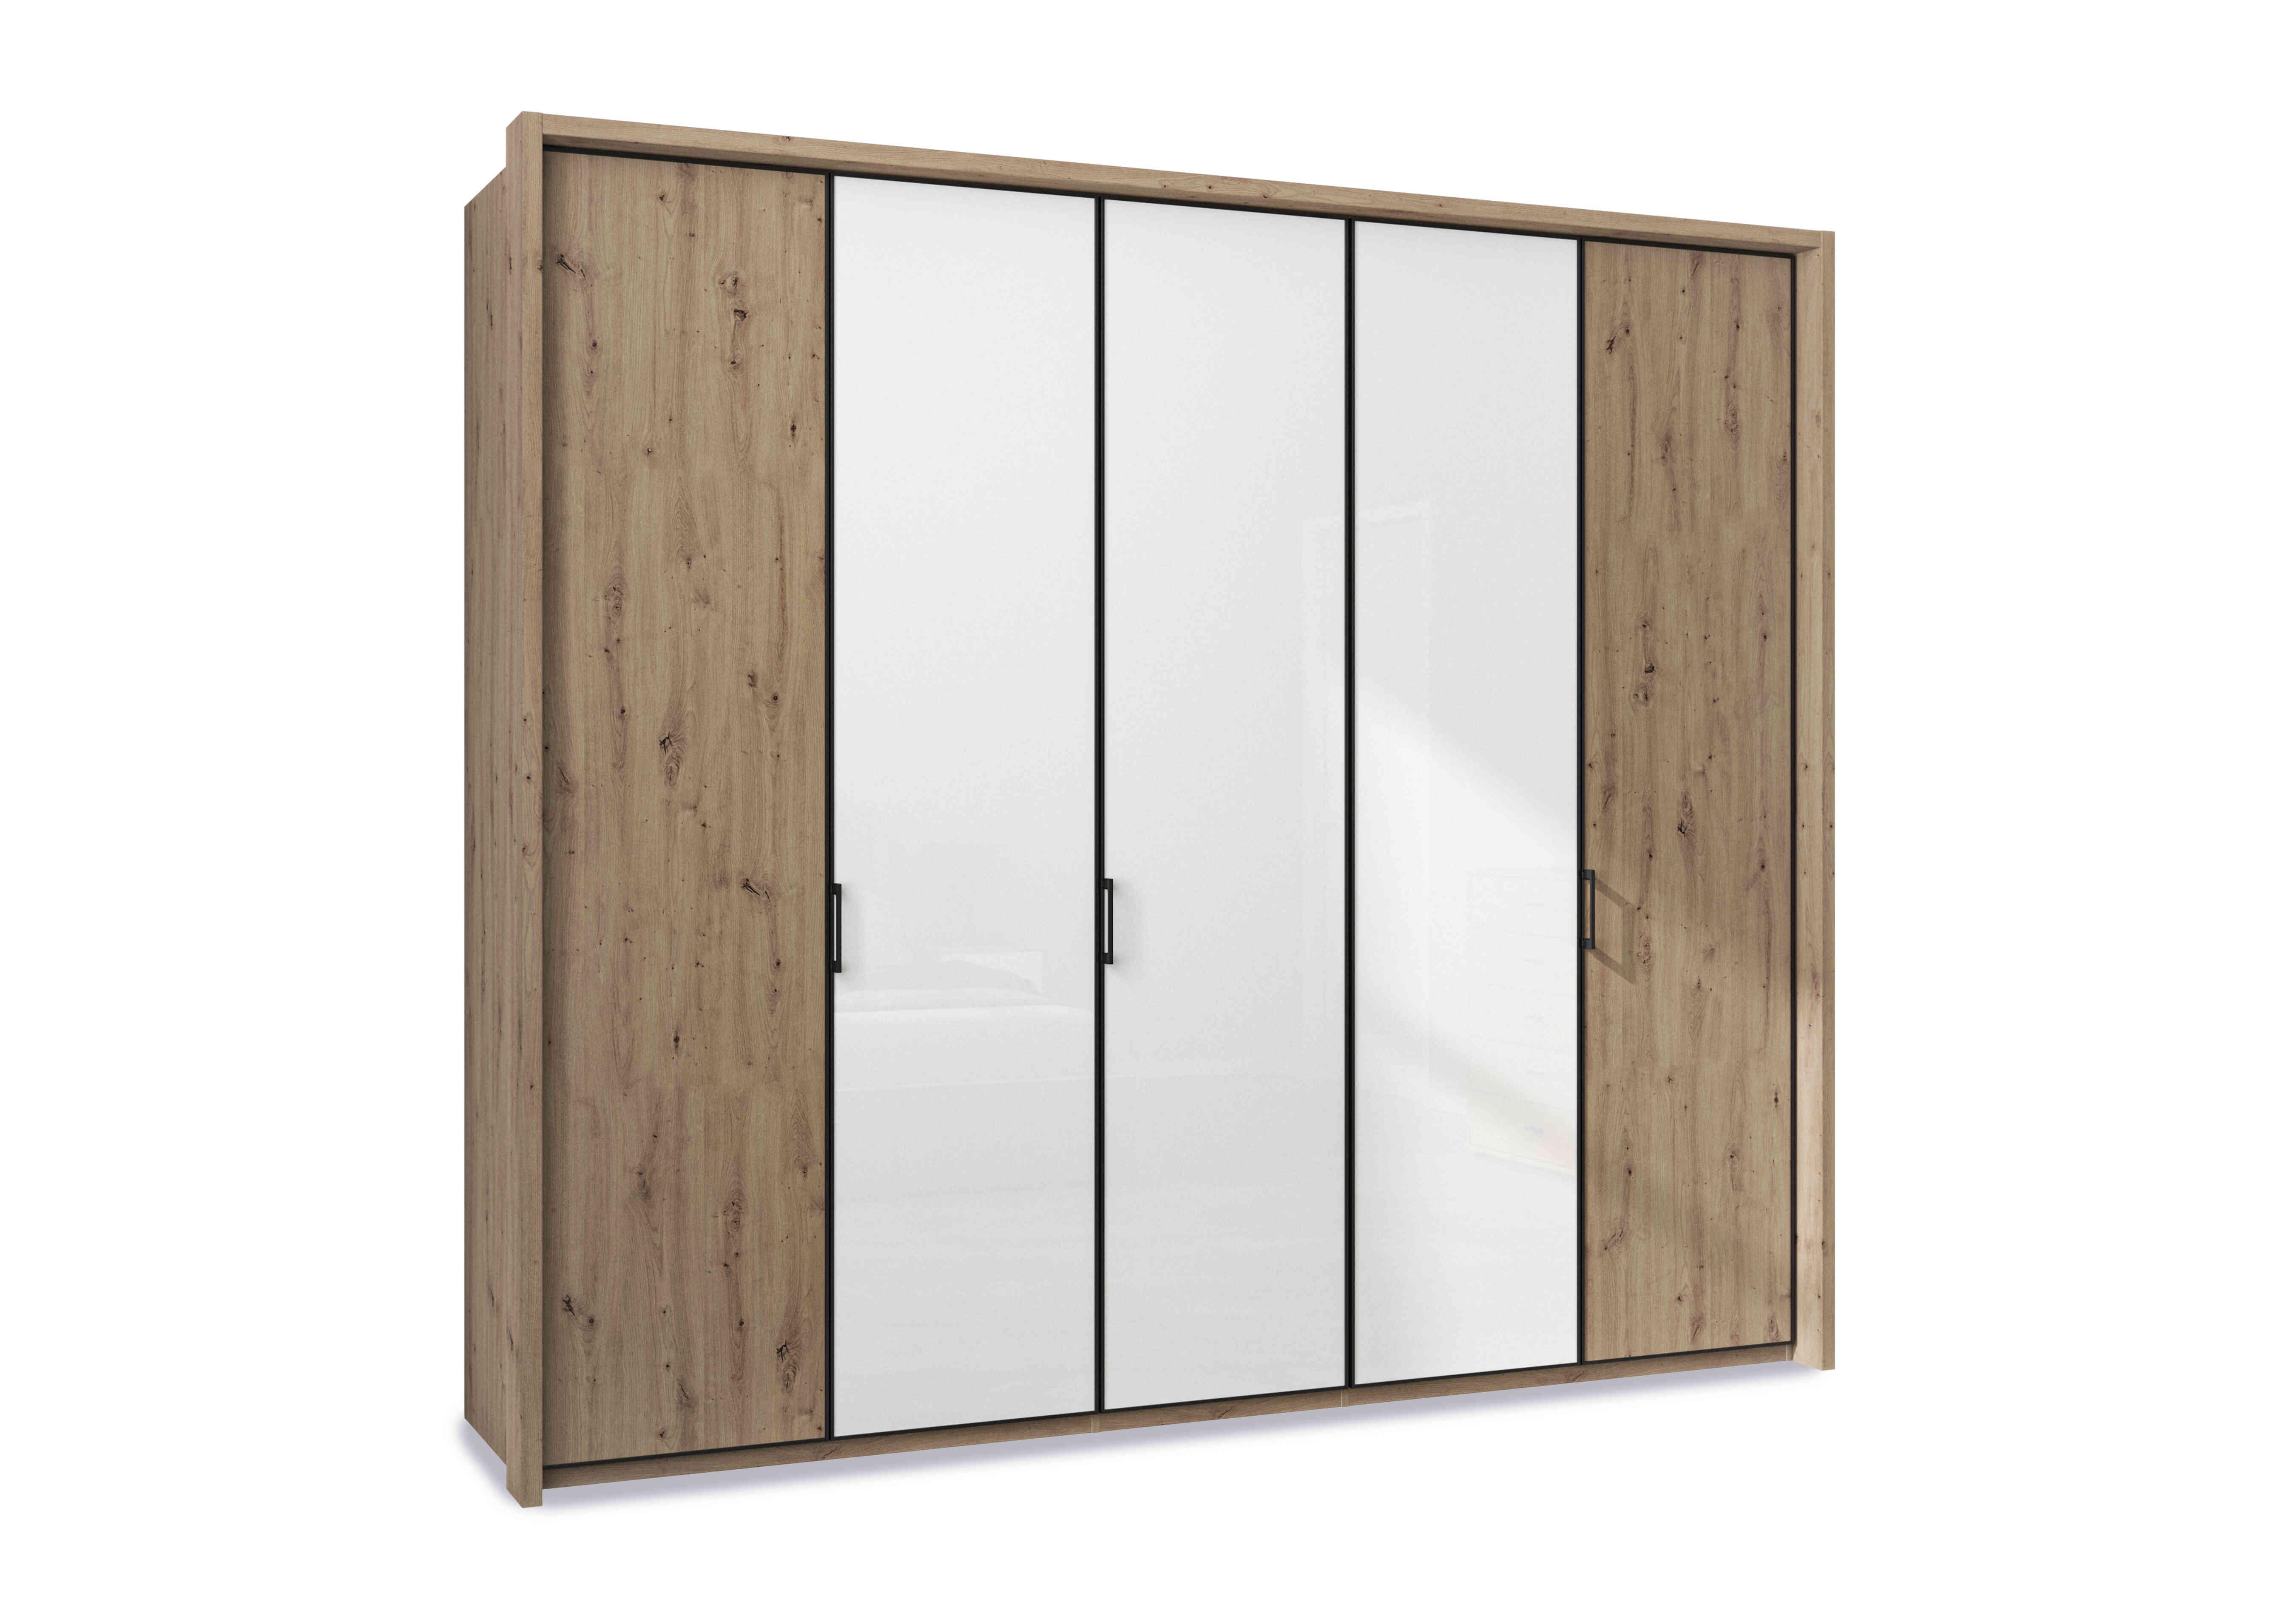 Dallas 257cm 5 Door Hinged Wardrobe with 3 Glass Doors in Bianco Oak And White on Furniture Village